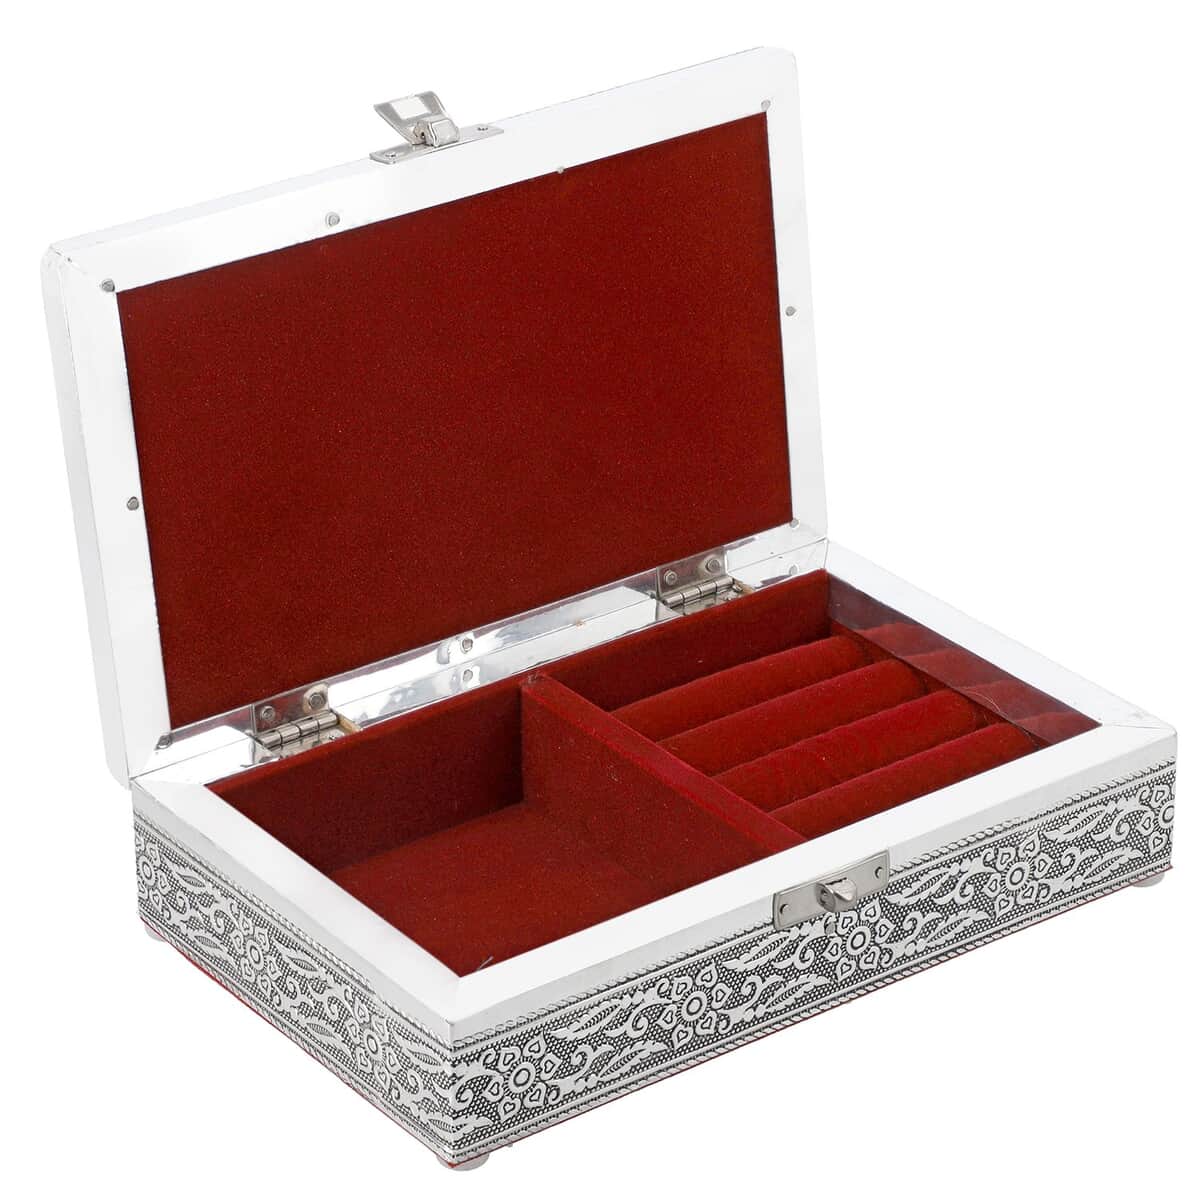 ADI'S EXCLUSIVE DEAL Aluminum Oxidized Elephant Face Pattern Half Empty and Half Ring Storage Jewelry Box with Anti Scratch Protection Interior image number 3